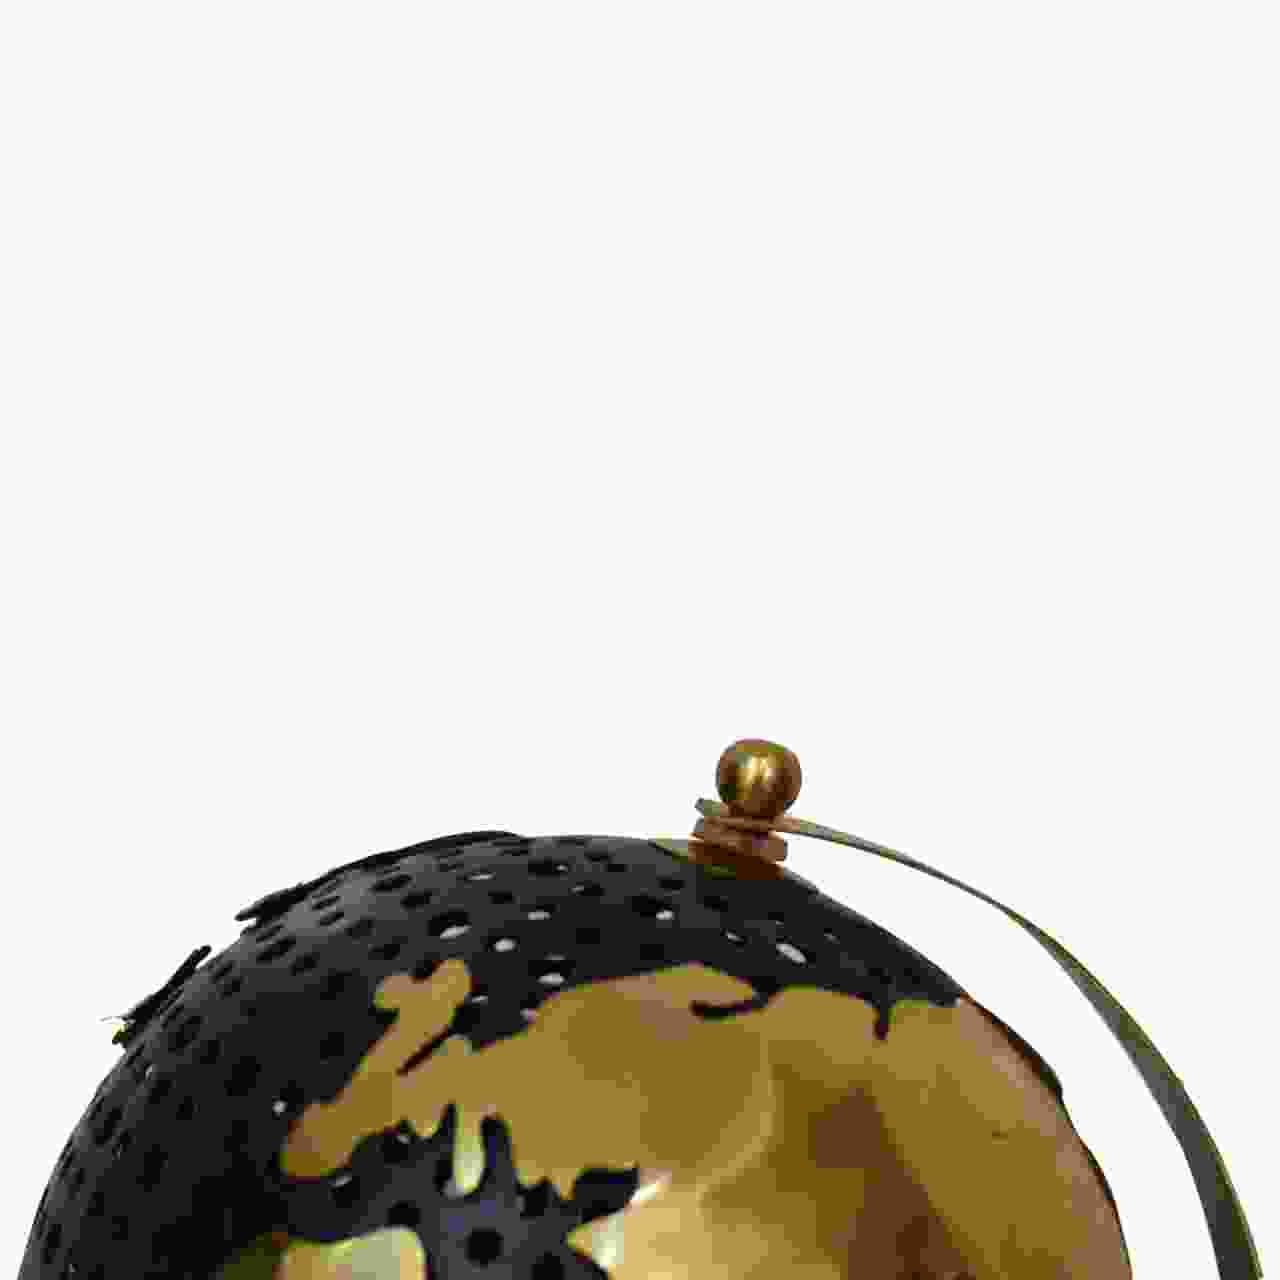 Black Globe with Gold Frame - Red Ross Retail-Furniture Specialists 